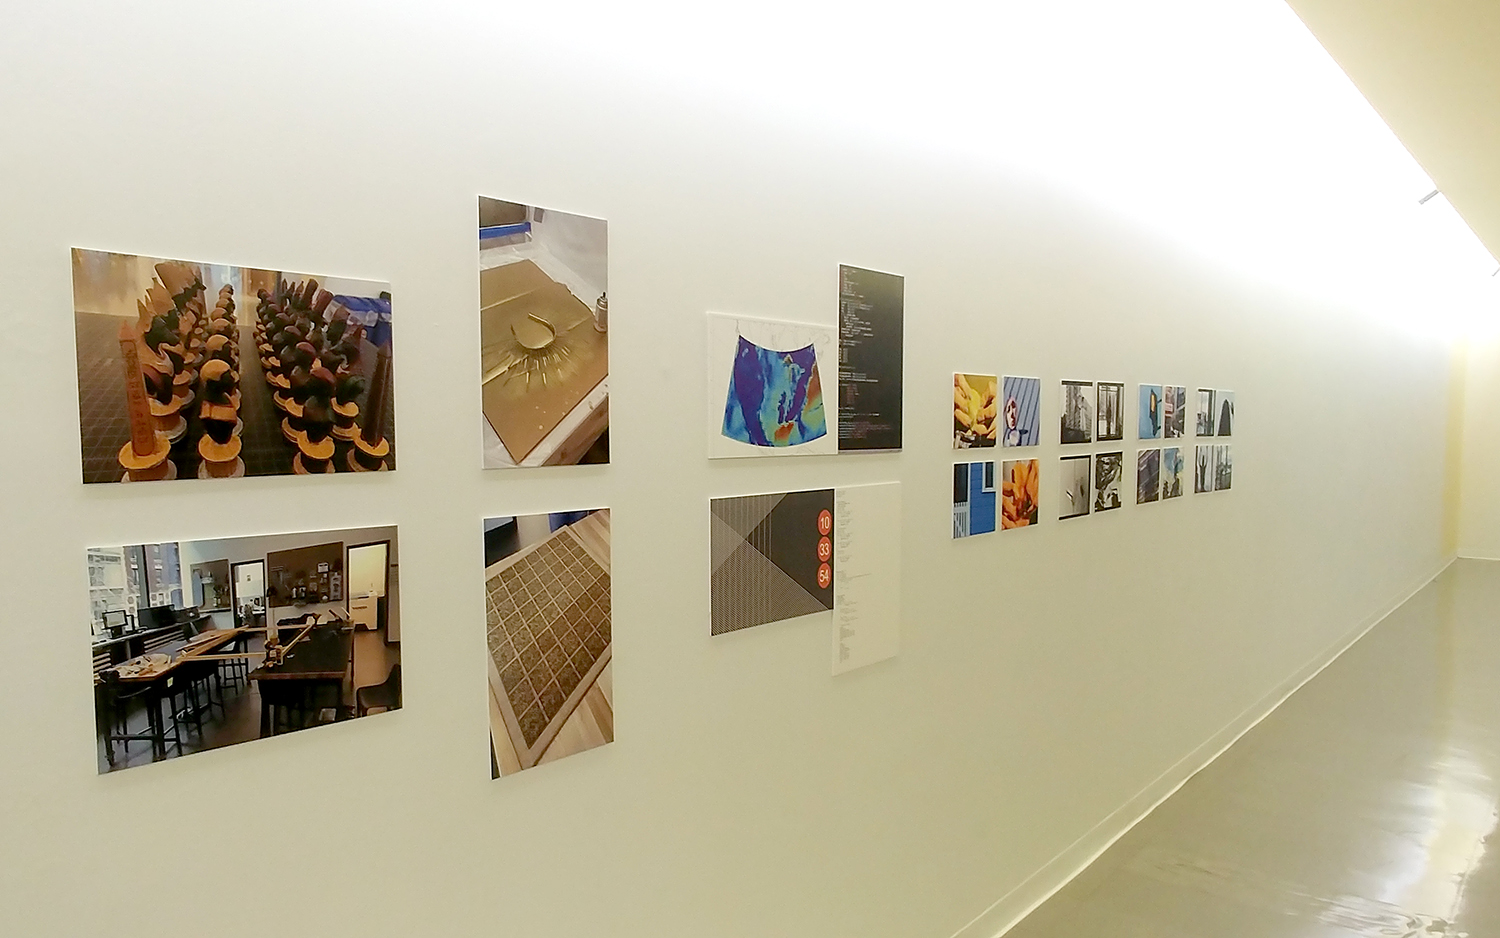 Photos of projects from the centers, hung on a long white wall.